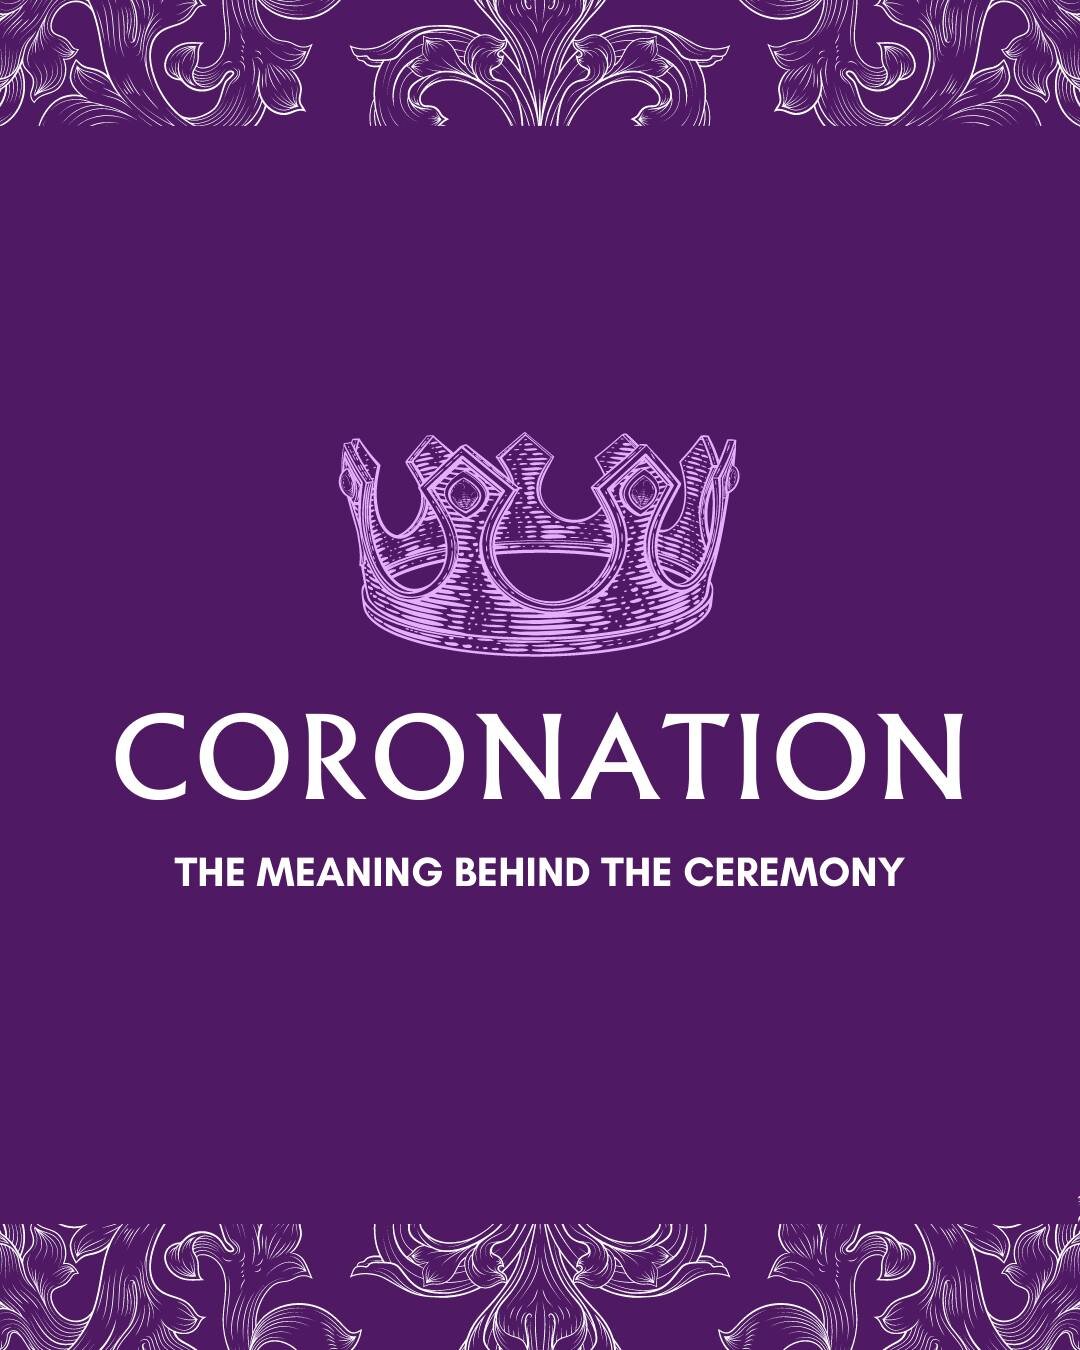 👑 This weekend is the historic Coronation weekend, where may of us will gather to watch the crowning of the king. Is there more behind all the pomp and ceremony that they day will hold? We look deeper into the meaning behind the ceremony. 👑